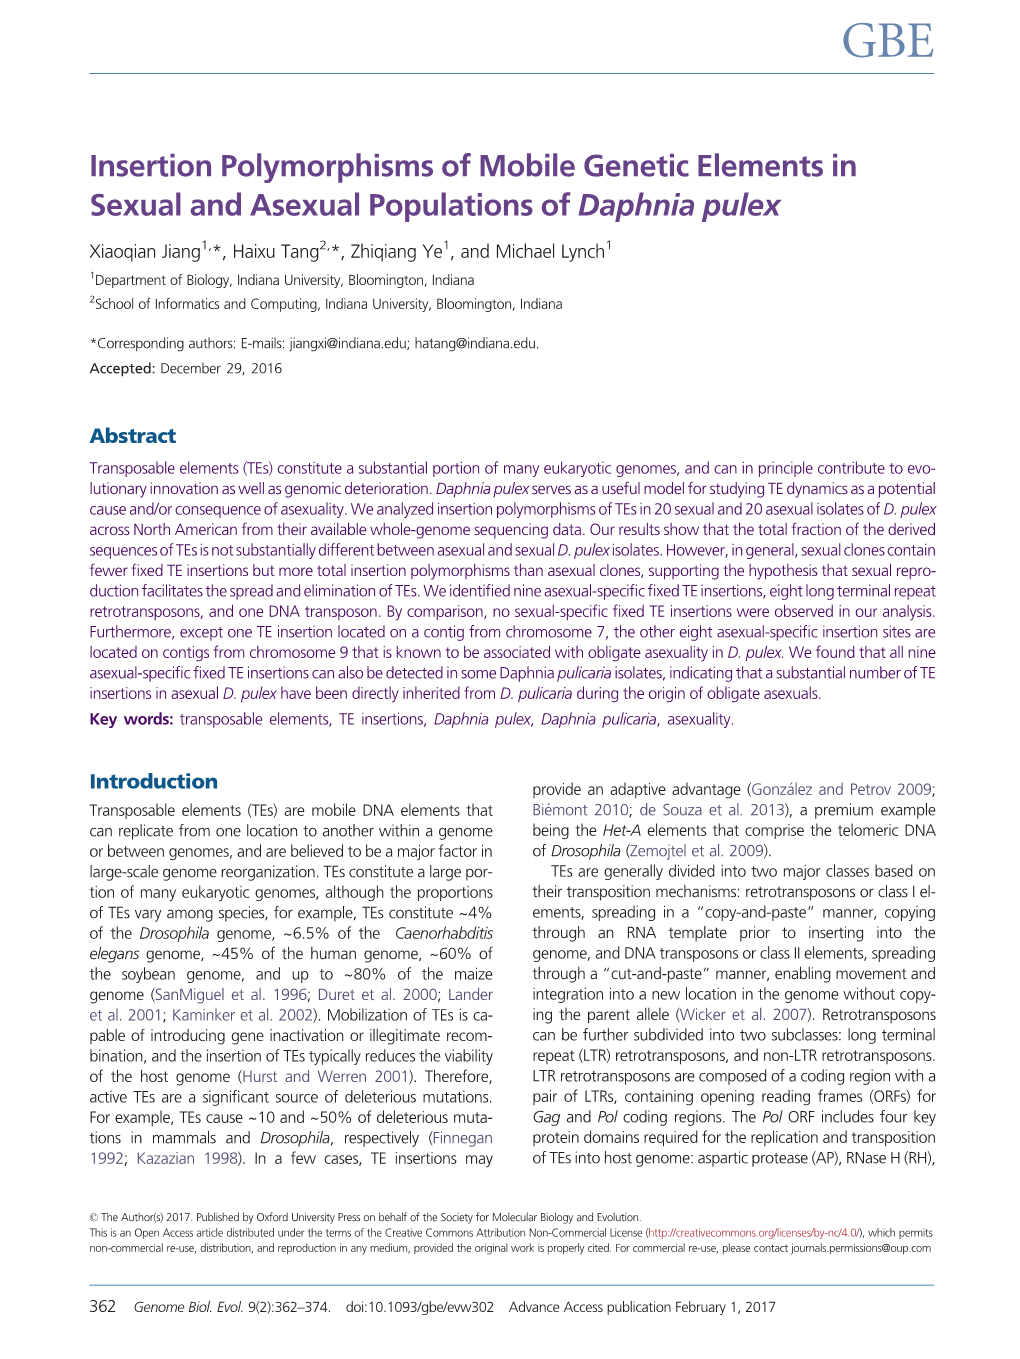 Insertion Polymorphisms of Mobile Genetic Elements in Sexual and Asexual Populations of Daphnia Pulex